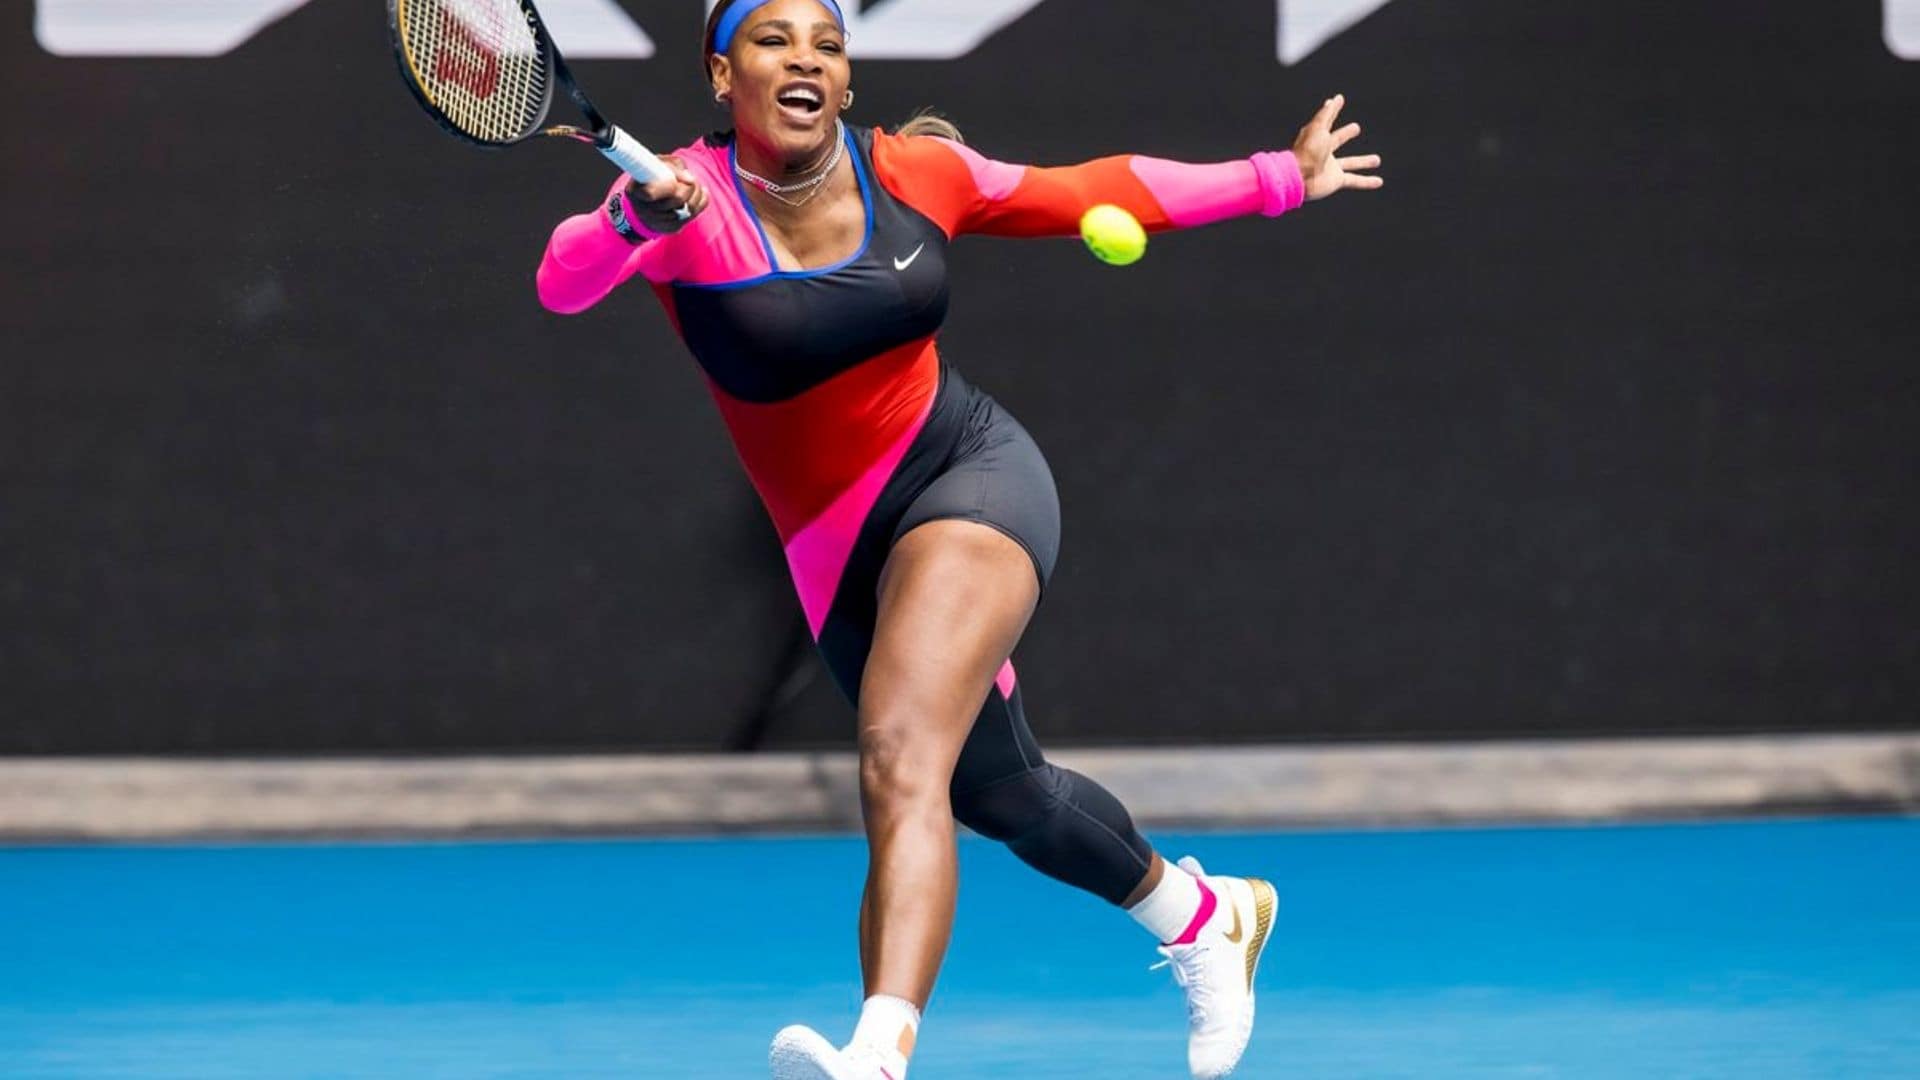 Serena Williams turned heads in a colorful catsuit that was half pants half shorts